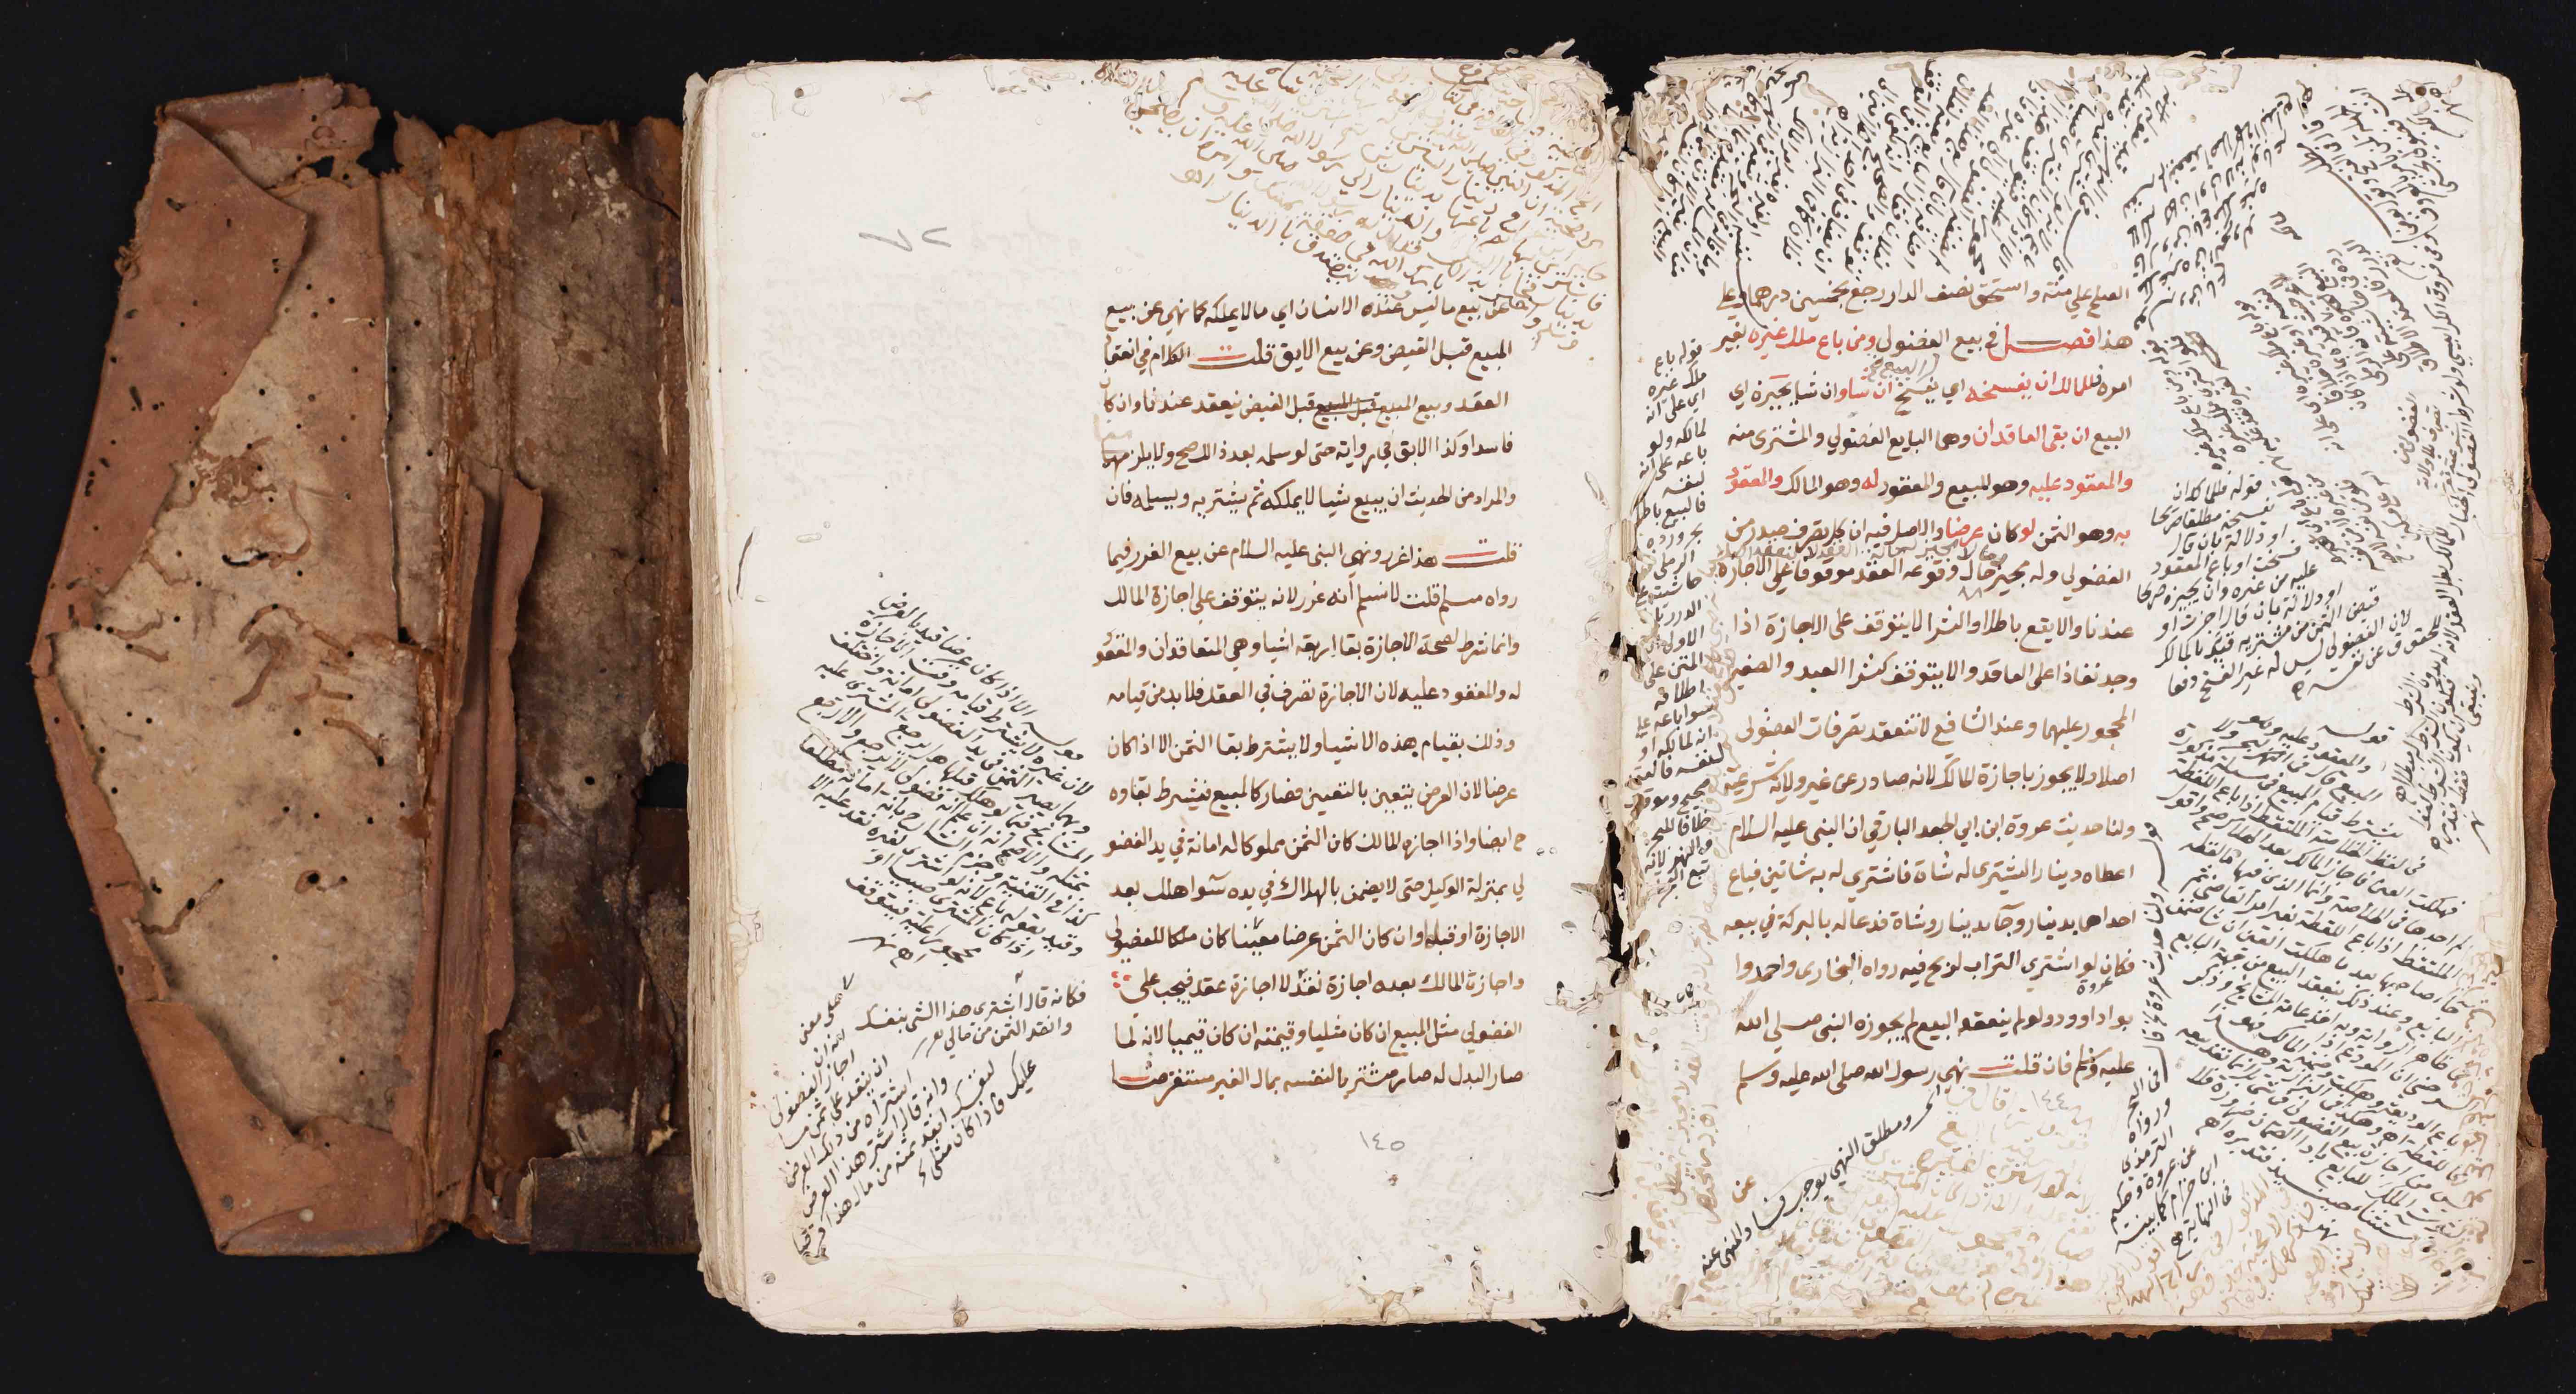 Treatise on Ḥanafī law from the Great Omari Mosque (<a href='https://w3id.org/vhmml/readingRoom/view/542998'>OMM 68</a>)